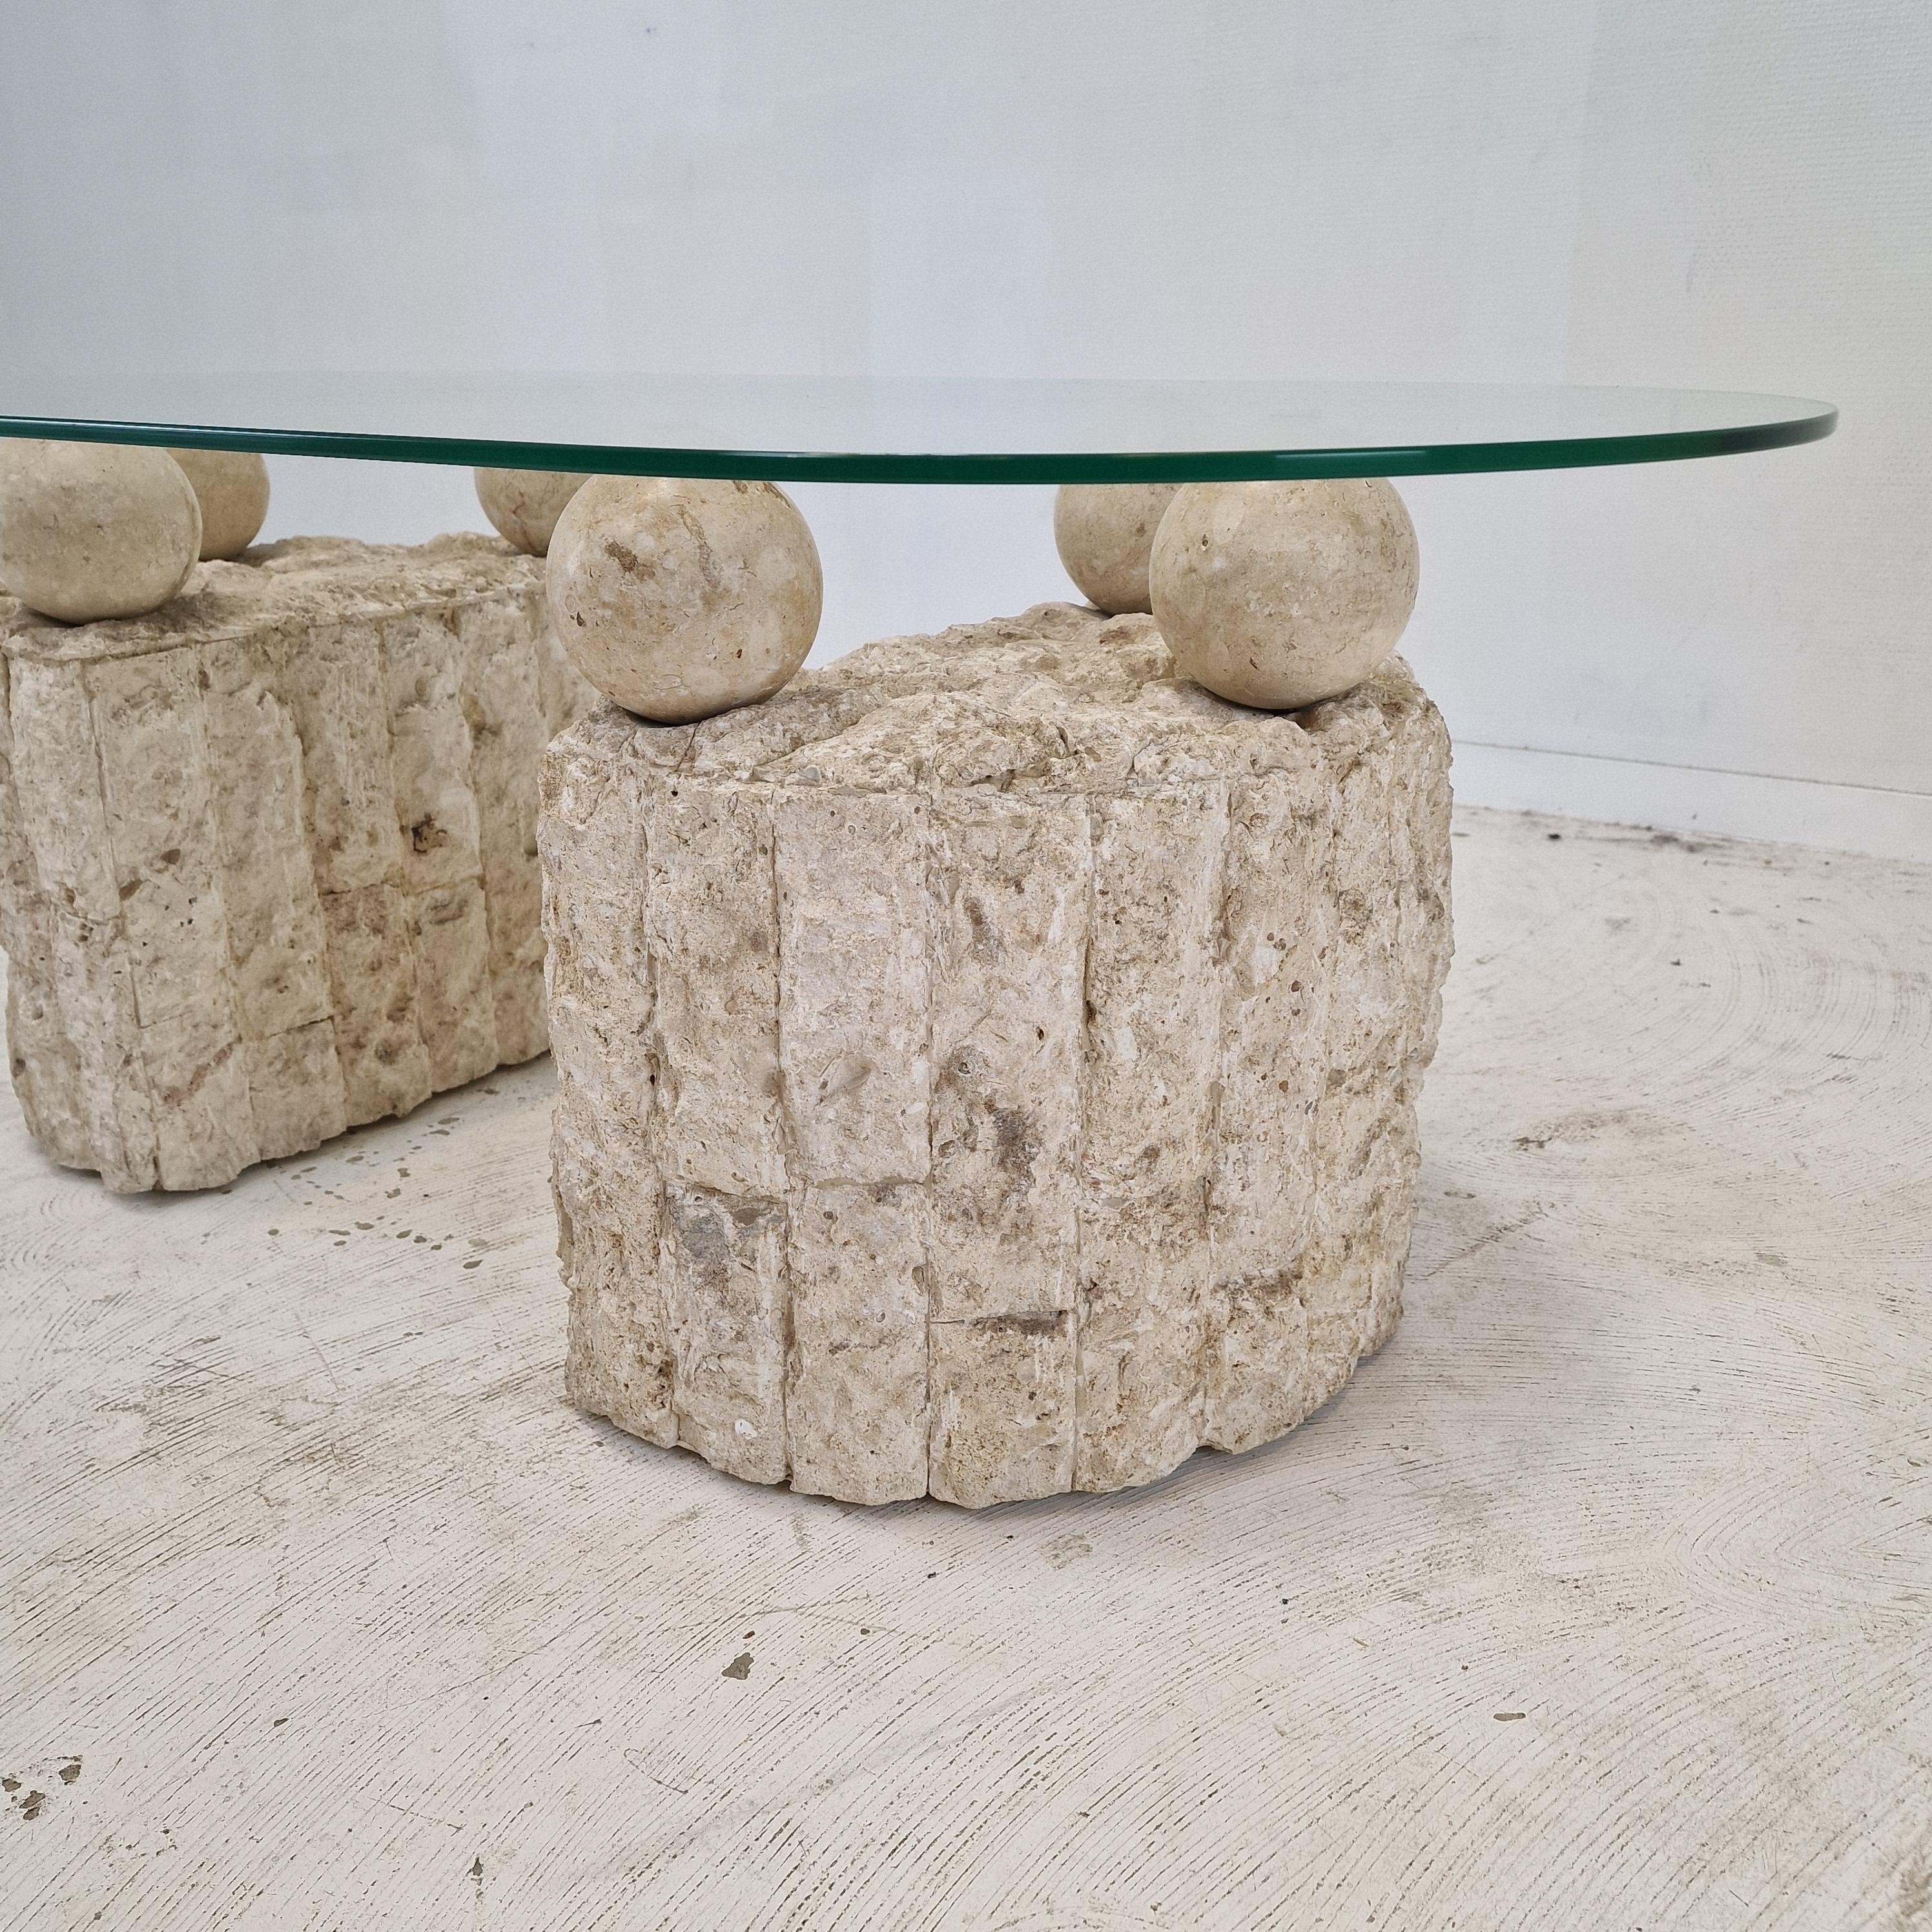 Magnussen Ponte Mactan Stone Coffee or Fossil Stone Table, 1980s For Sale 1